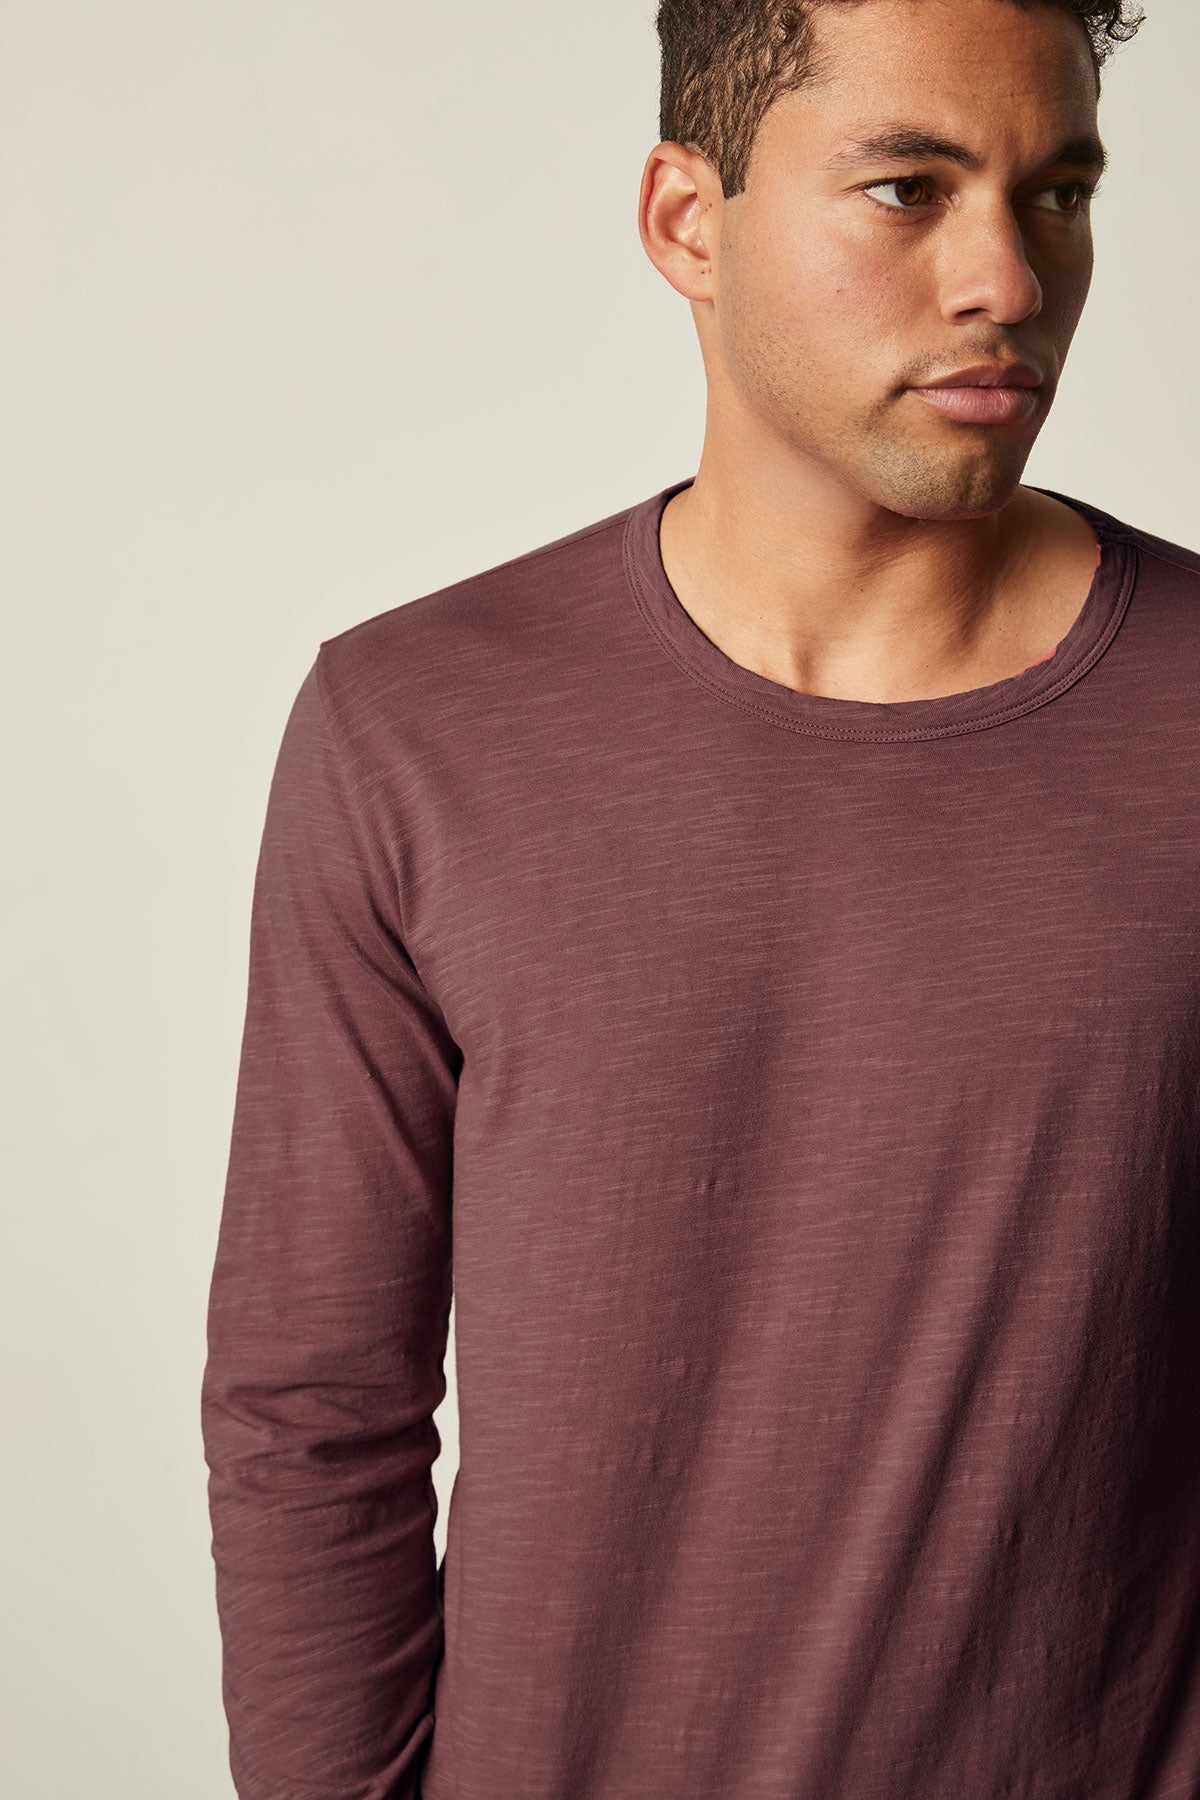   A man sporting a KAI CREW NECK TEE by Velvet by Graham & Spencer, perfect as a layering piece or worn on its own. 